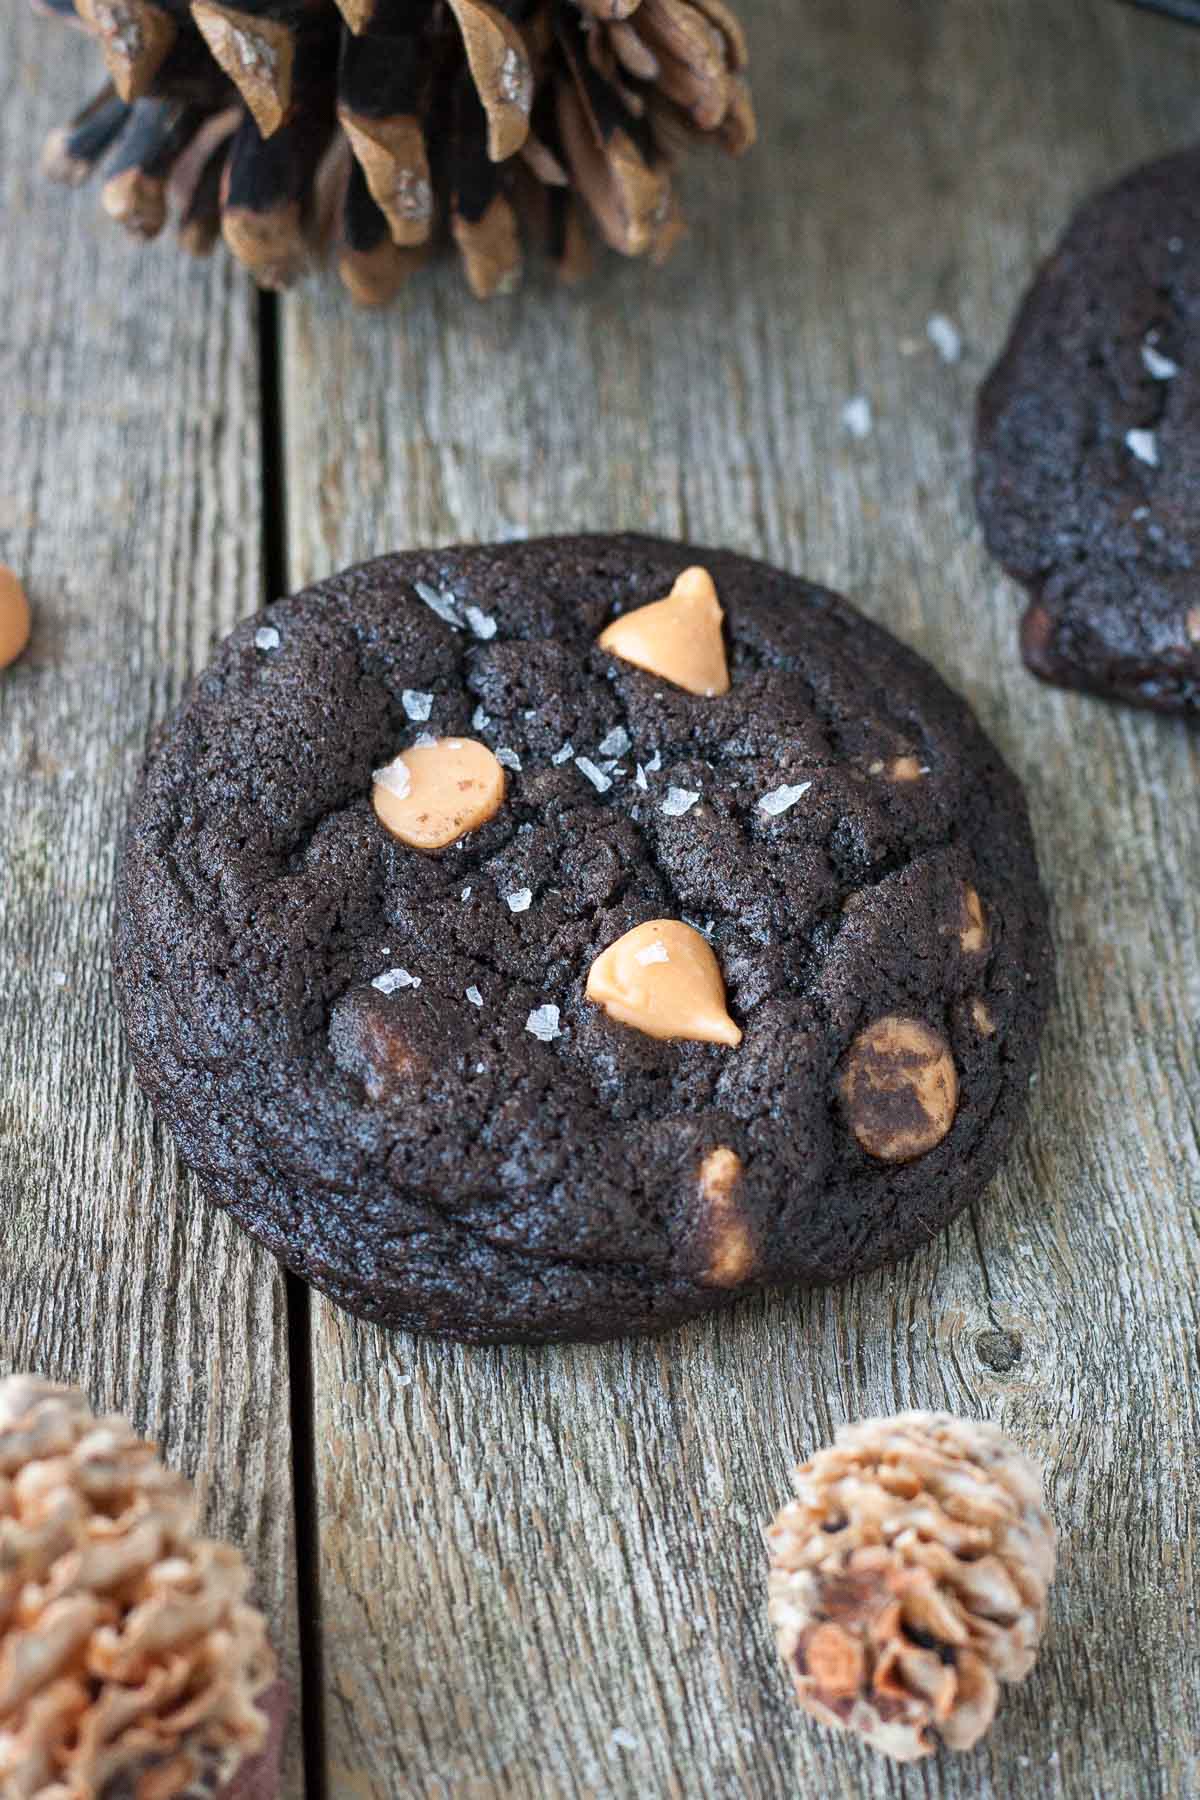 A close up of a cookie on a wooden background.